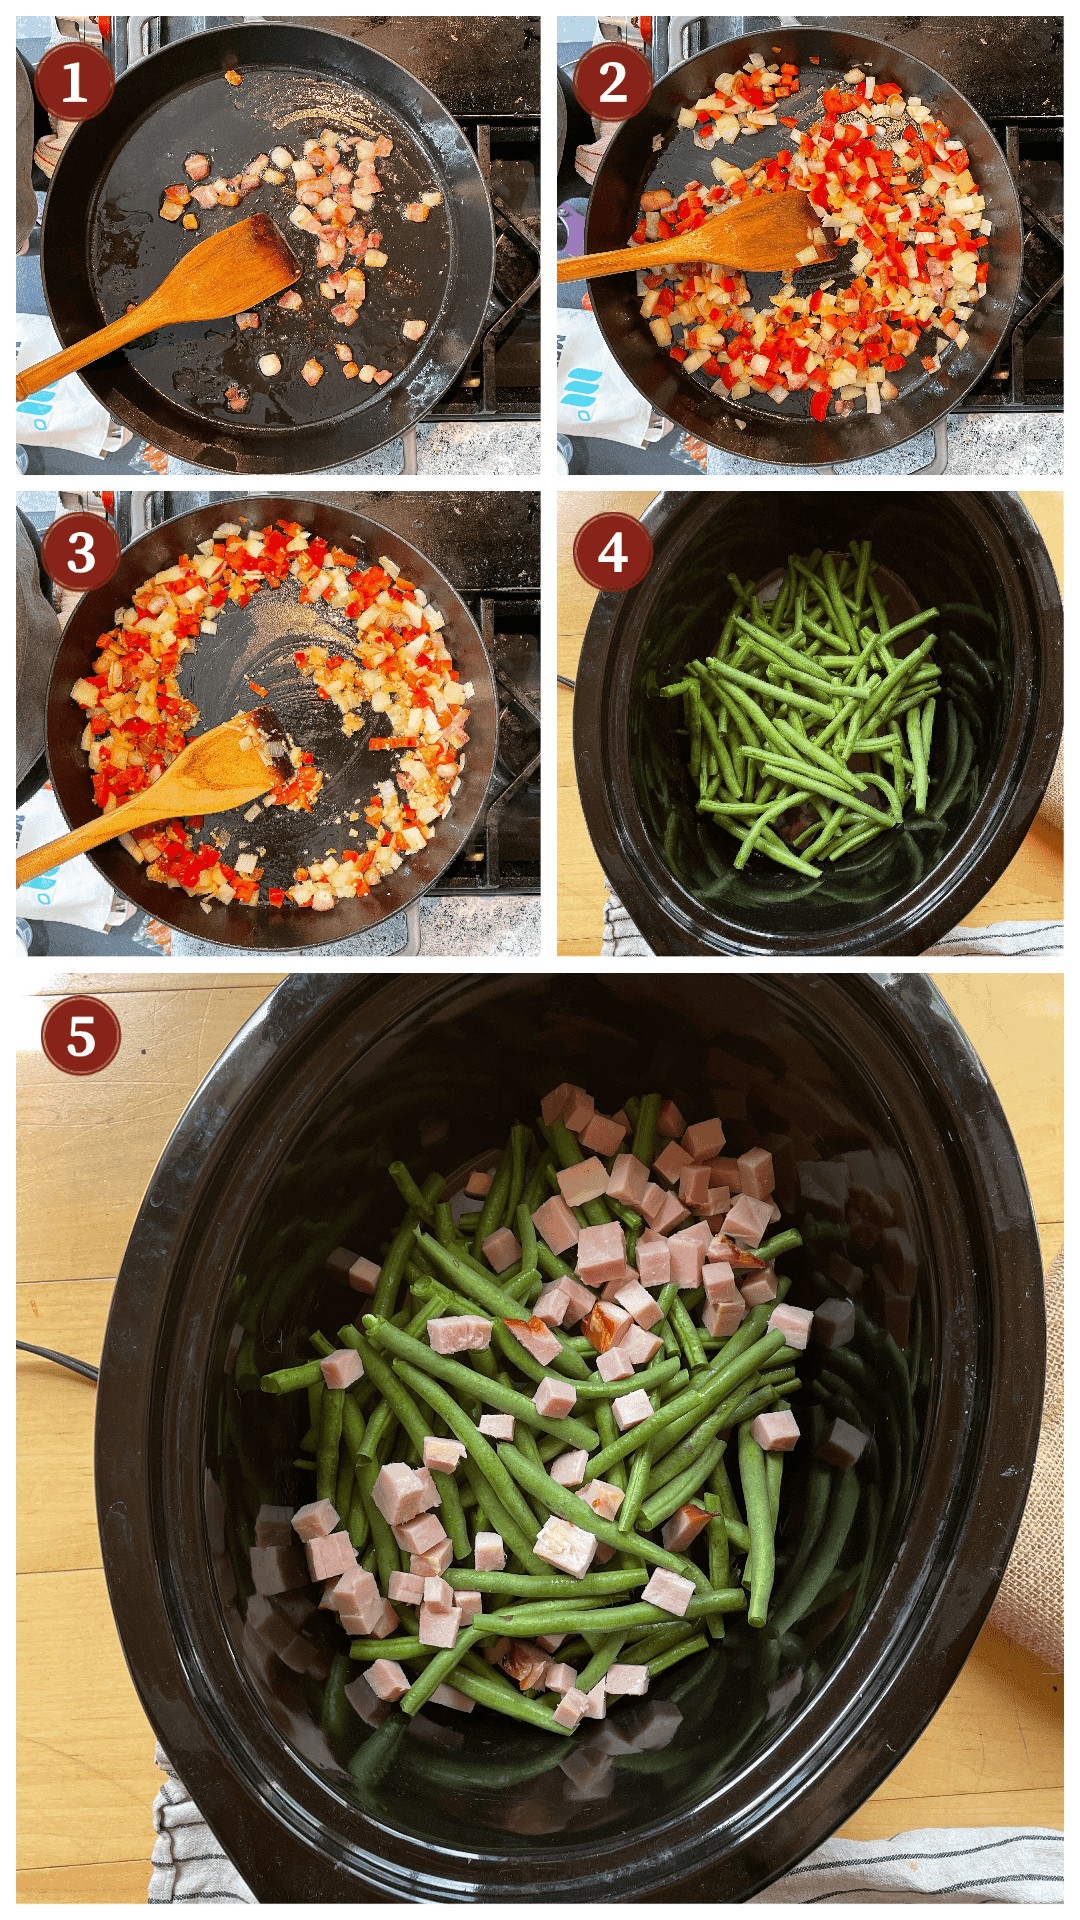 A collage of images showing how to cook southern green beans in a crockpot with bacon, steps 1 - 5.